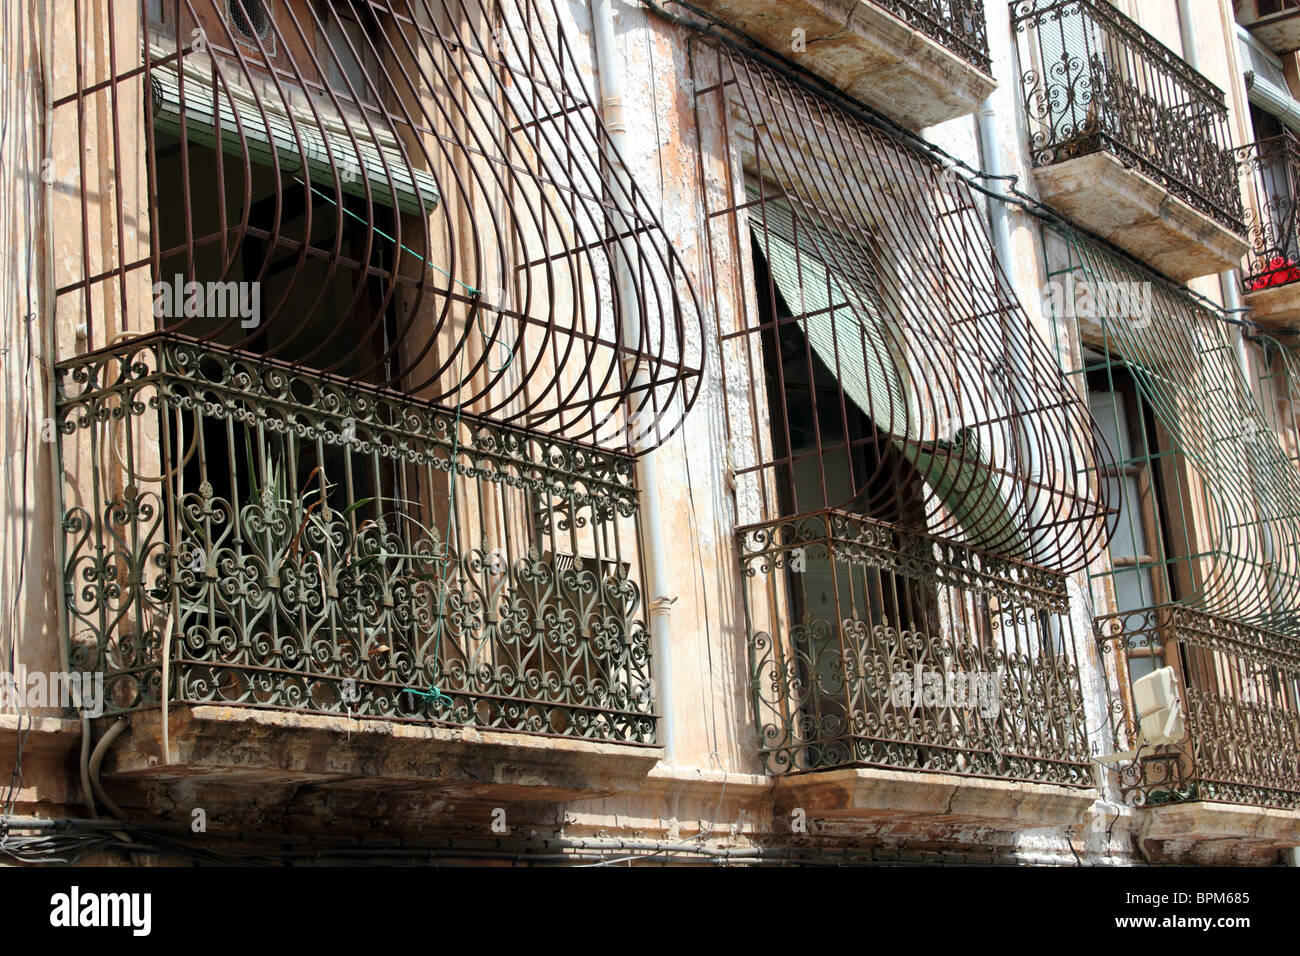 View of windows in Almeria, Spain showing typical wrought iron balcony and window guard or grille Stock Photo